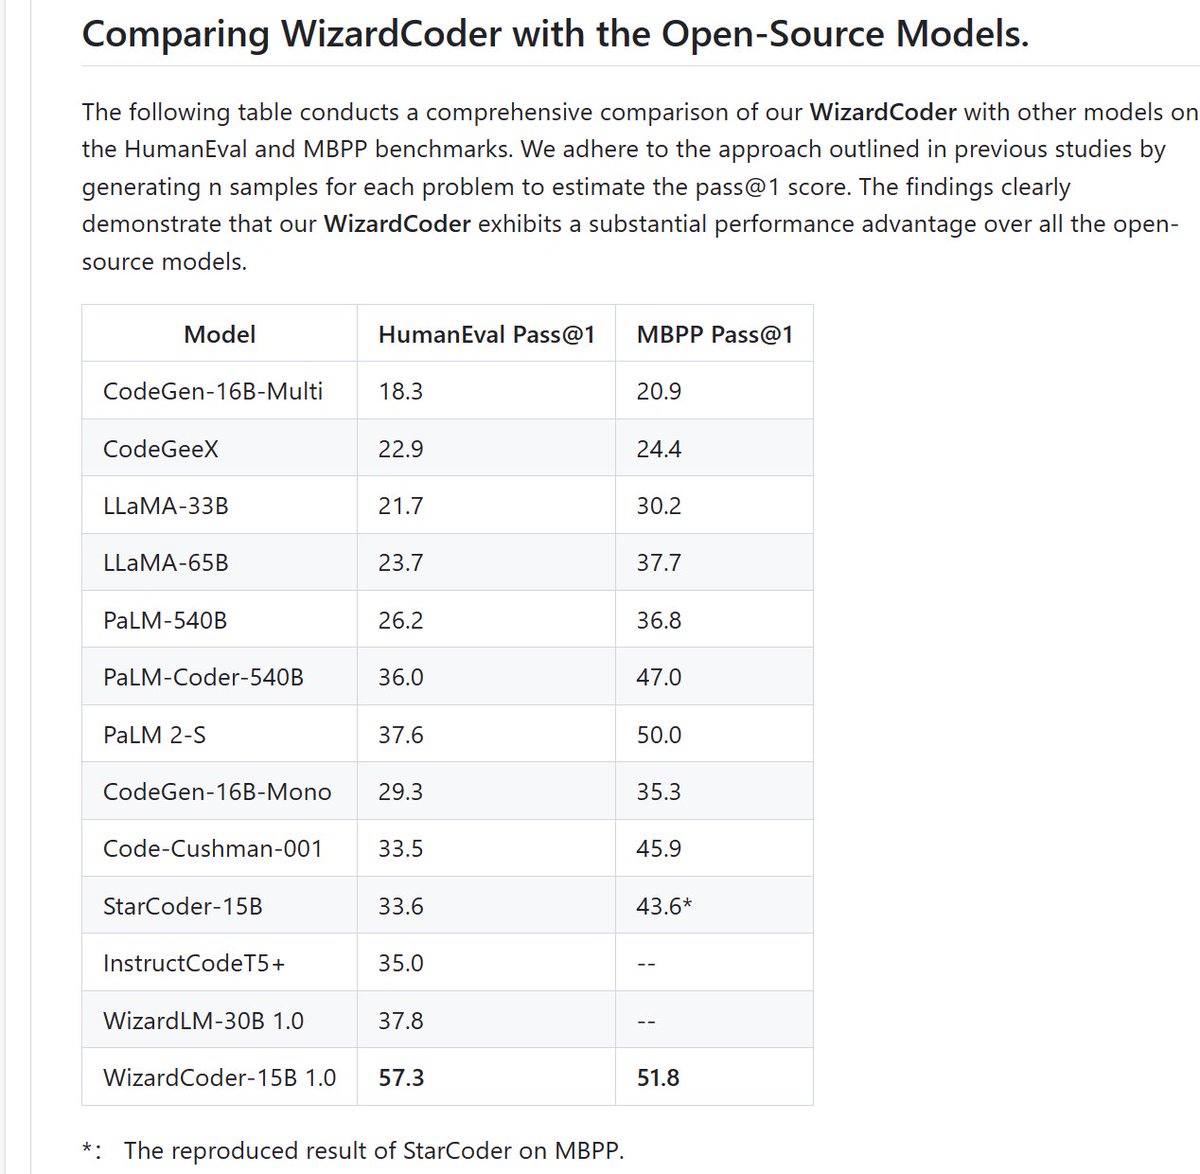 🔥🔥🔥
Introduce the newest WizardCoder model !

1. Surpass Claude-Plus (+6.8), Bard (+15.3) and InstructCodeT5+ (+22.3) on HumanEval Benchmarks

2. Paper is coming, with brand-new Evol+ methods for code LLMs

Github:
github.com/nlpxucan/Wizar…

HF Weight:
huggingface.co/WizardLM/Wizar…